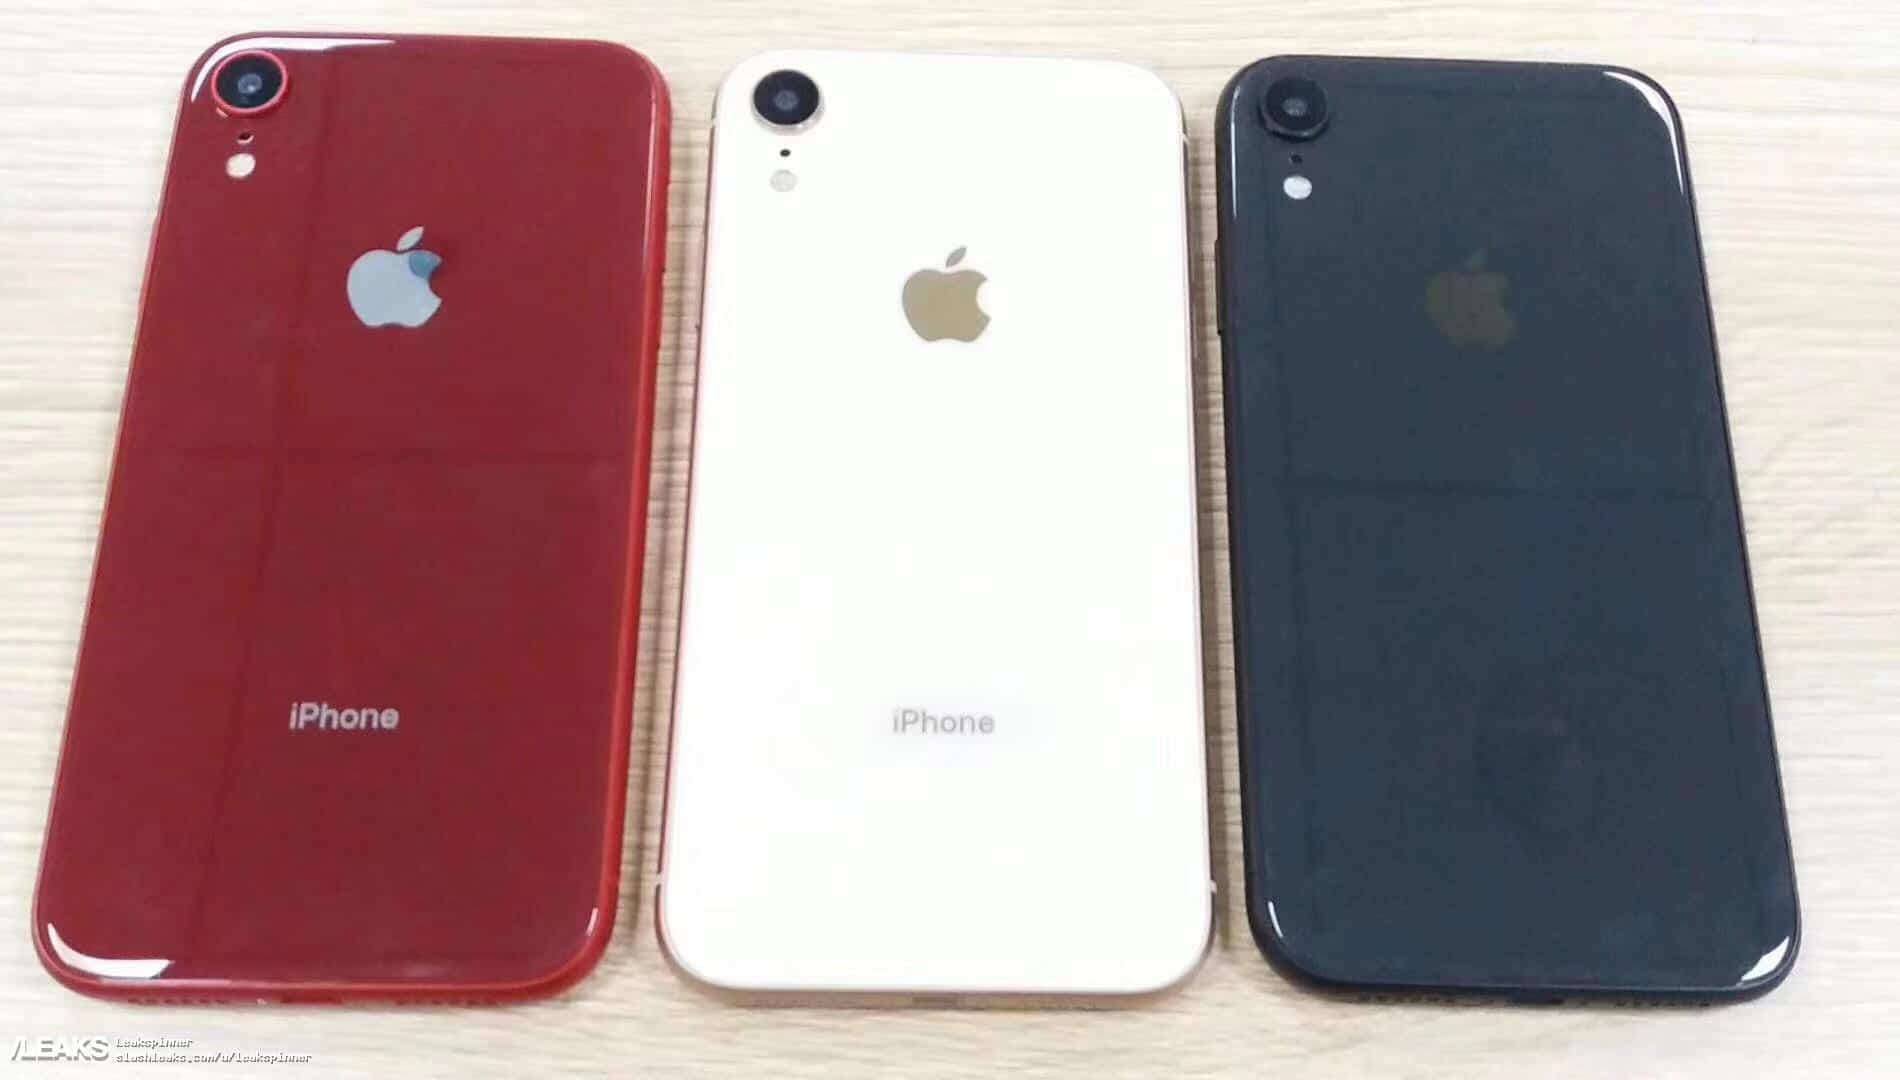 6.1-inch iPhone color options